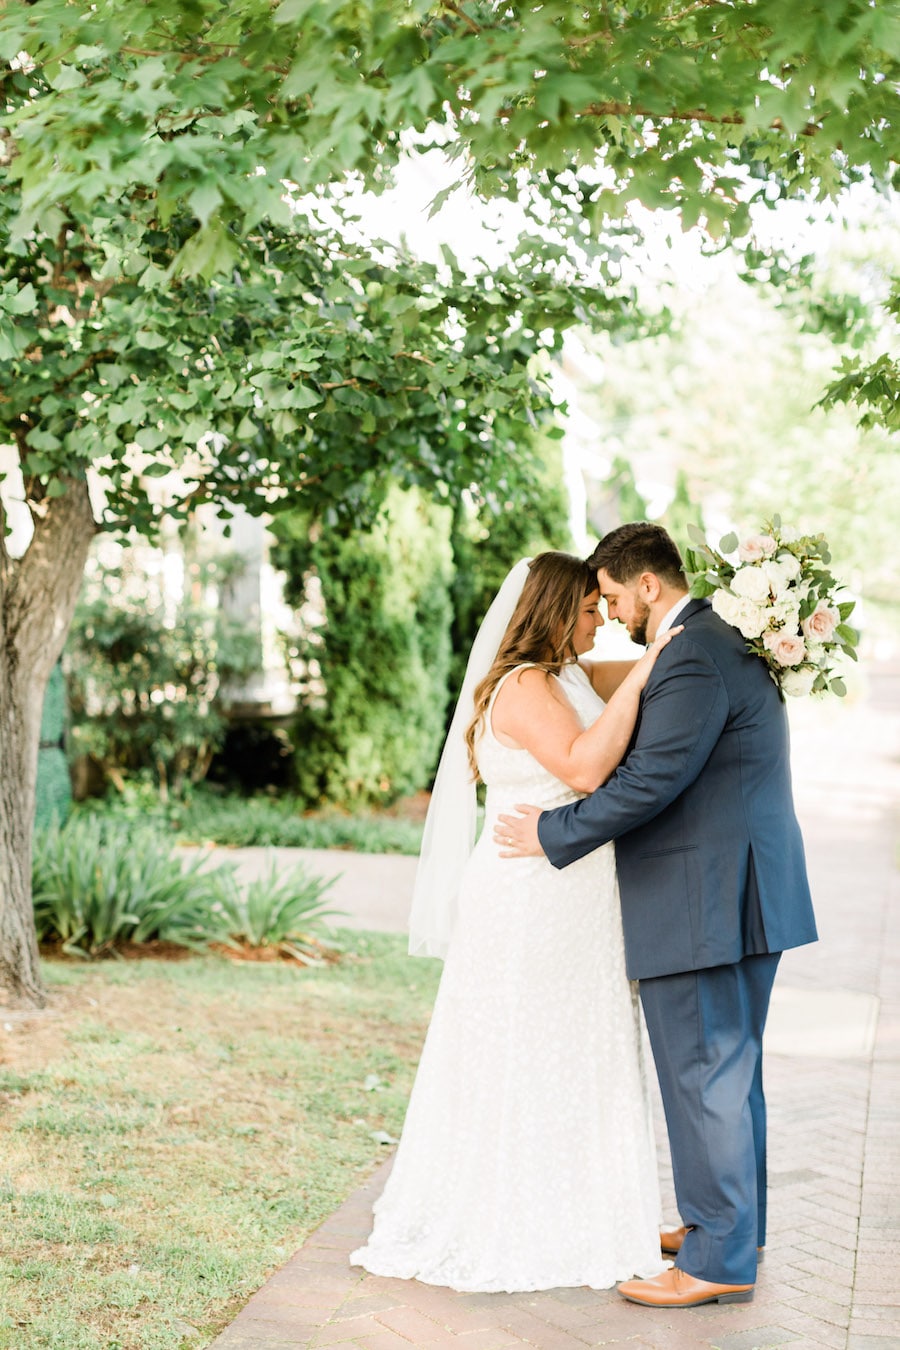 Outdoor Wedding Reception Near Nashville with Sage Green and Candles